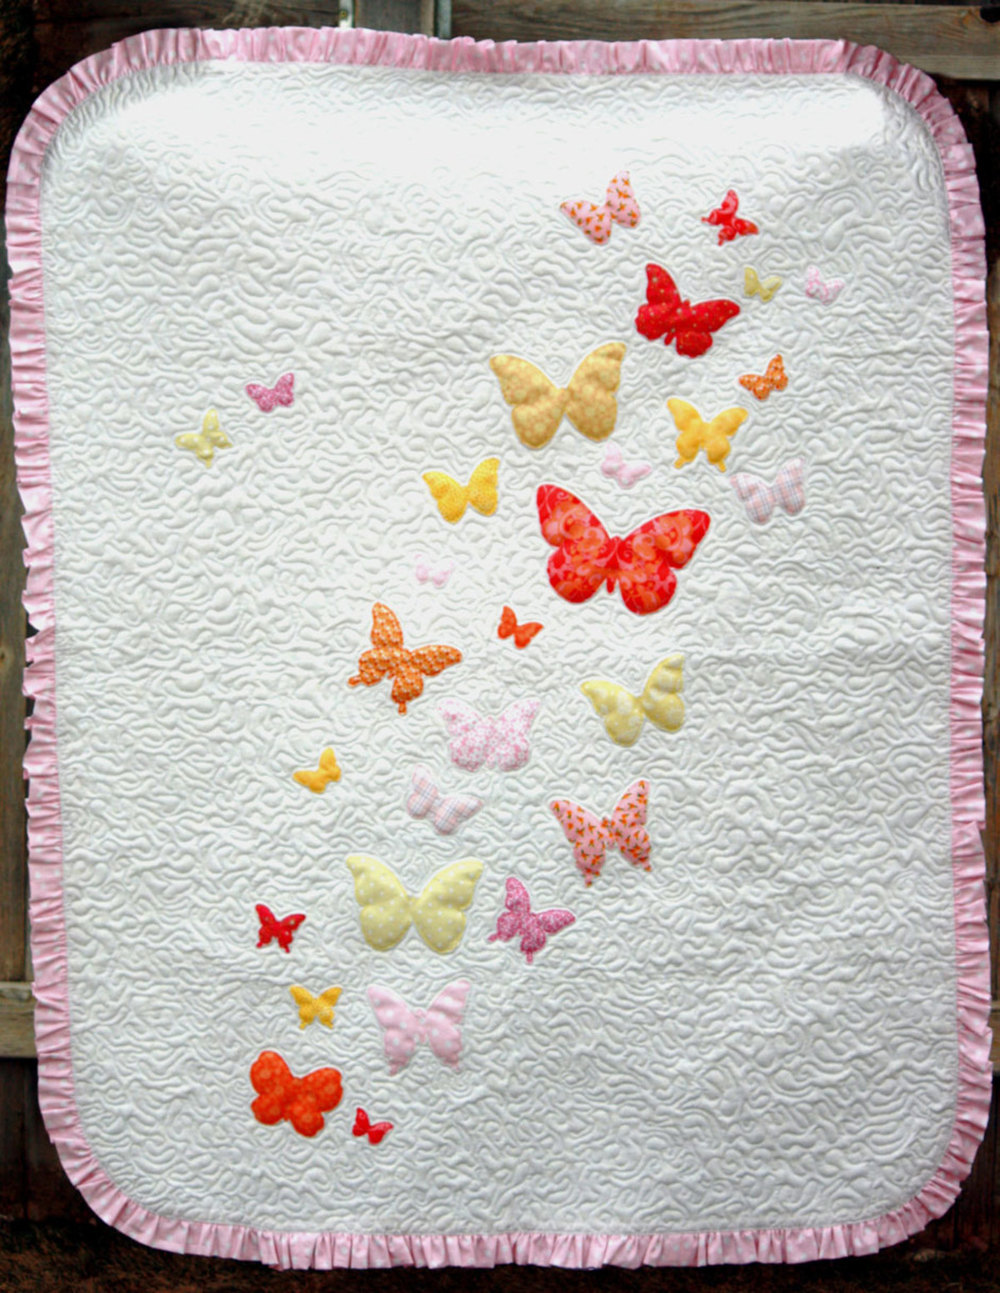 What are some good baby patchwork quilt patterns?